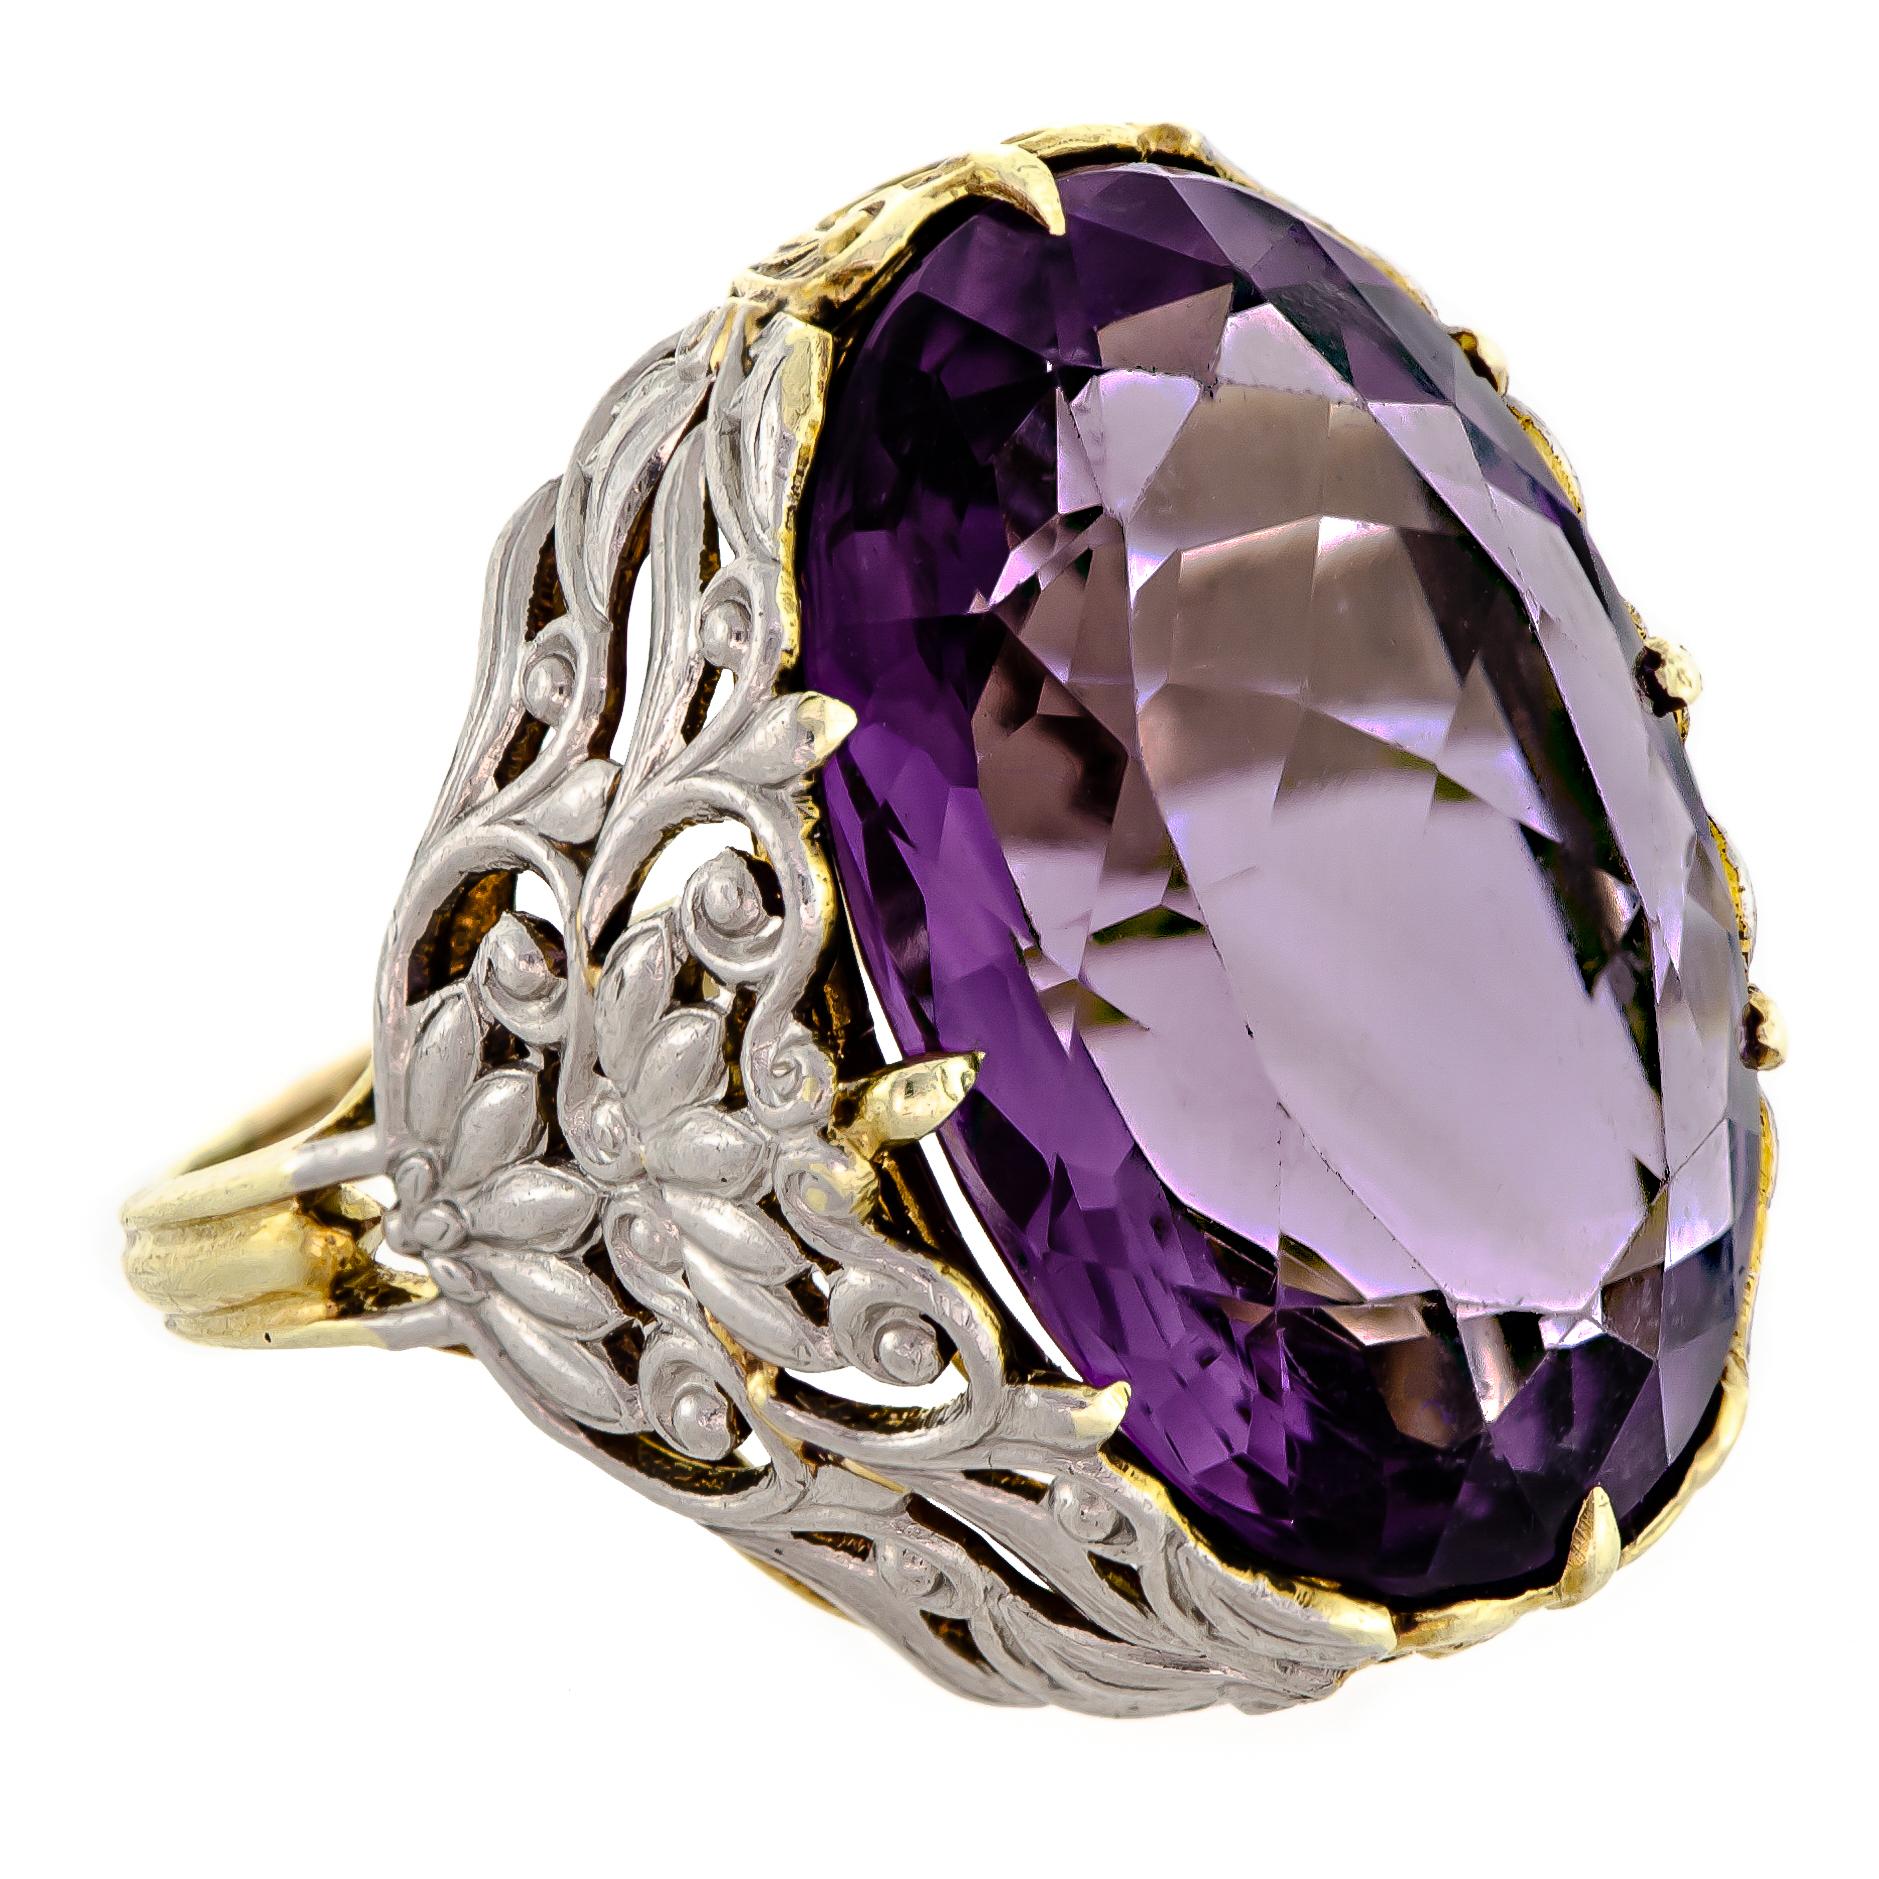 Exquisite antique amethyst and two-colored gold ring - centrally set with one large oval shaped brilliant cut rich deep colored purple amethyst measuring approximately 23.1mm x 18mm set into a lovely two-colored gold yellow and white - 14kt frame -